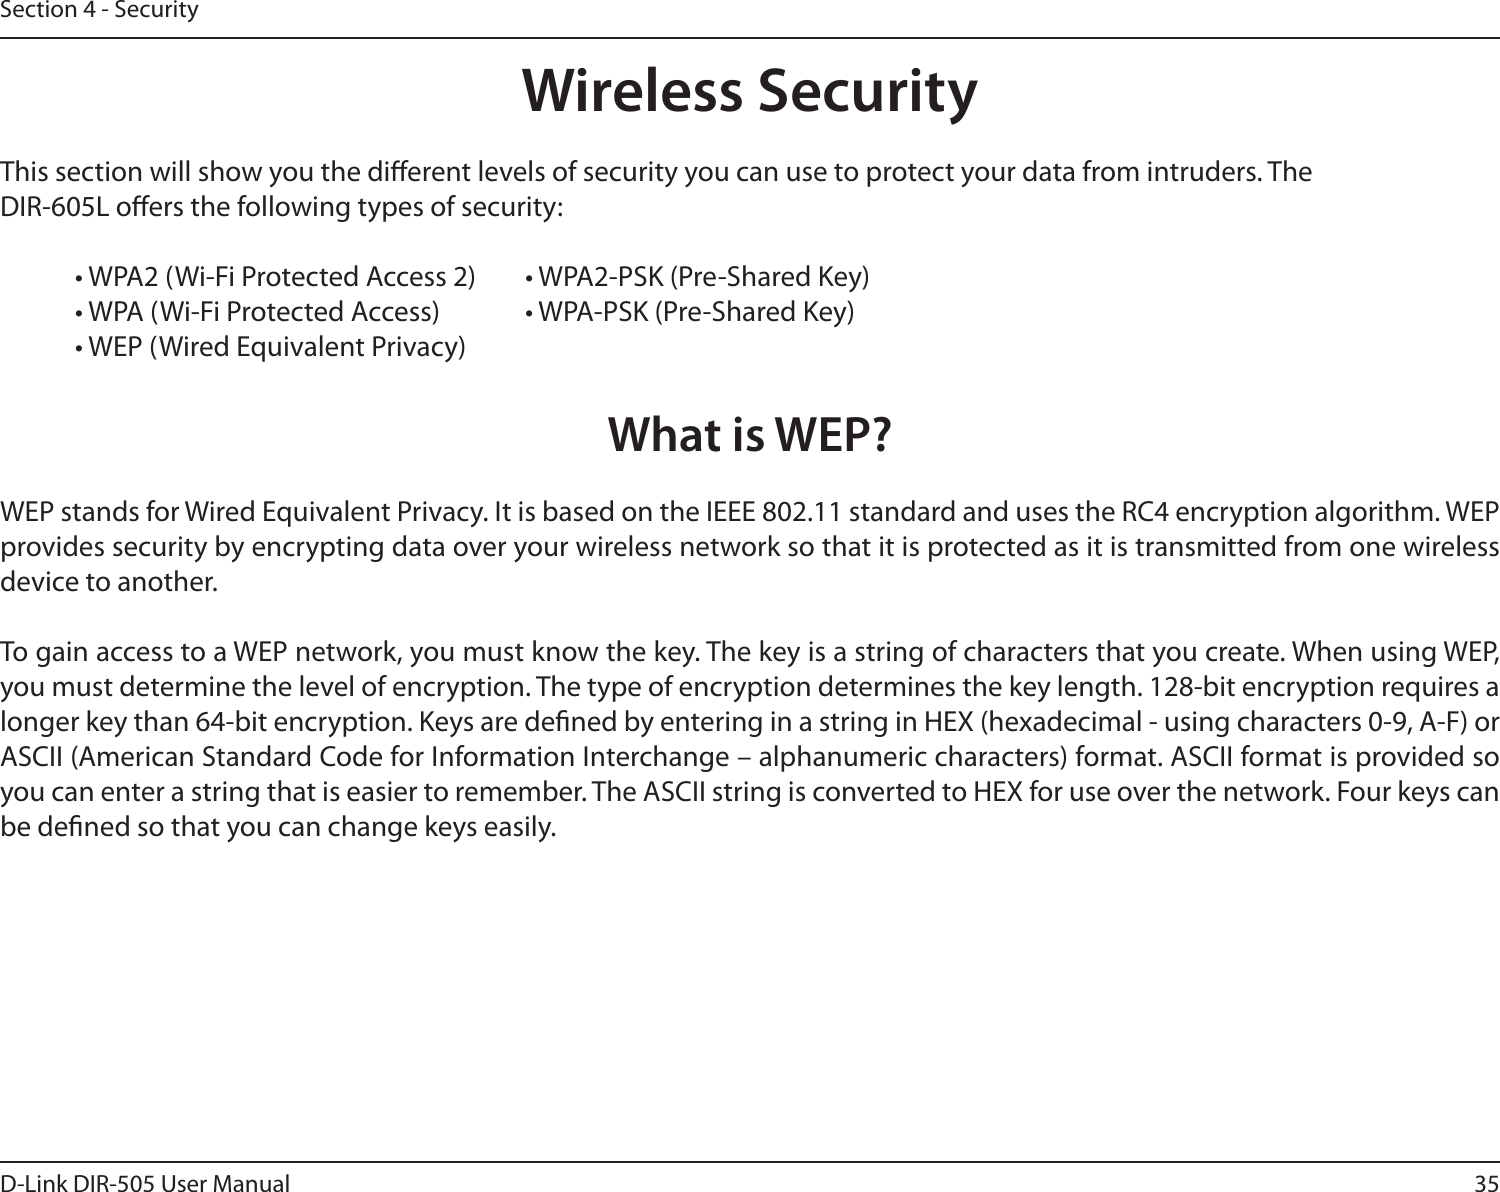 35D-Link DIR-505 User ManualSection 4 - SecurityWireless SecurityThis section will show you the dierent levels of security you can use to protect your data from intruders. TheDIR-605L oers the following types of security:  • WPA2 (Wi-Fi Protected Access 2)   • WPA2-PSK (Pre-Shared Key)  • WPA (Wi-Fi Protected Access)   • WPA-PSK (Pre-Shared Key)  • WEP (Wired Equivalent Privacy)What is WEP?WEP stands for Wired Equivalent Privacy. It is based on the IEEE 802.11 standard and uses the RC4 encryption algorithm. WEPprovides security by encrypting data over your wireless network so that it is protected as it is transmitted from one wireless device to another.To gain access to a WEP network, you must know the key. The key is a string of characters that you create. When using WEP, you must determine the level of encryption. The type of encryption determines the key length. 128-bit encryption requires alonger key than 64-bit encryption. Keys are dened by entering in a string in HEX (hexadecimal - using characters 0-9, A-F) or ASCII (American Standard Code for Information Interchange – alphanumeric characters) format. ASCII format is provided so you can enter a string that is easier to remember. The ASCII string is converted to HEX for use over the network. Four keys can be dened so that you can change keys easily.